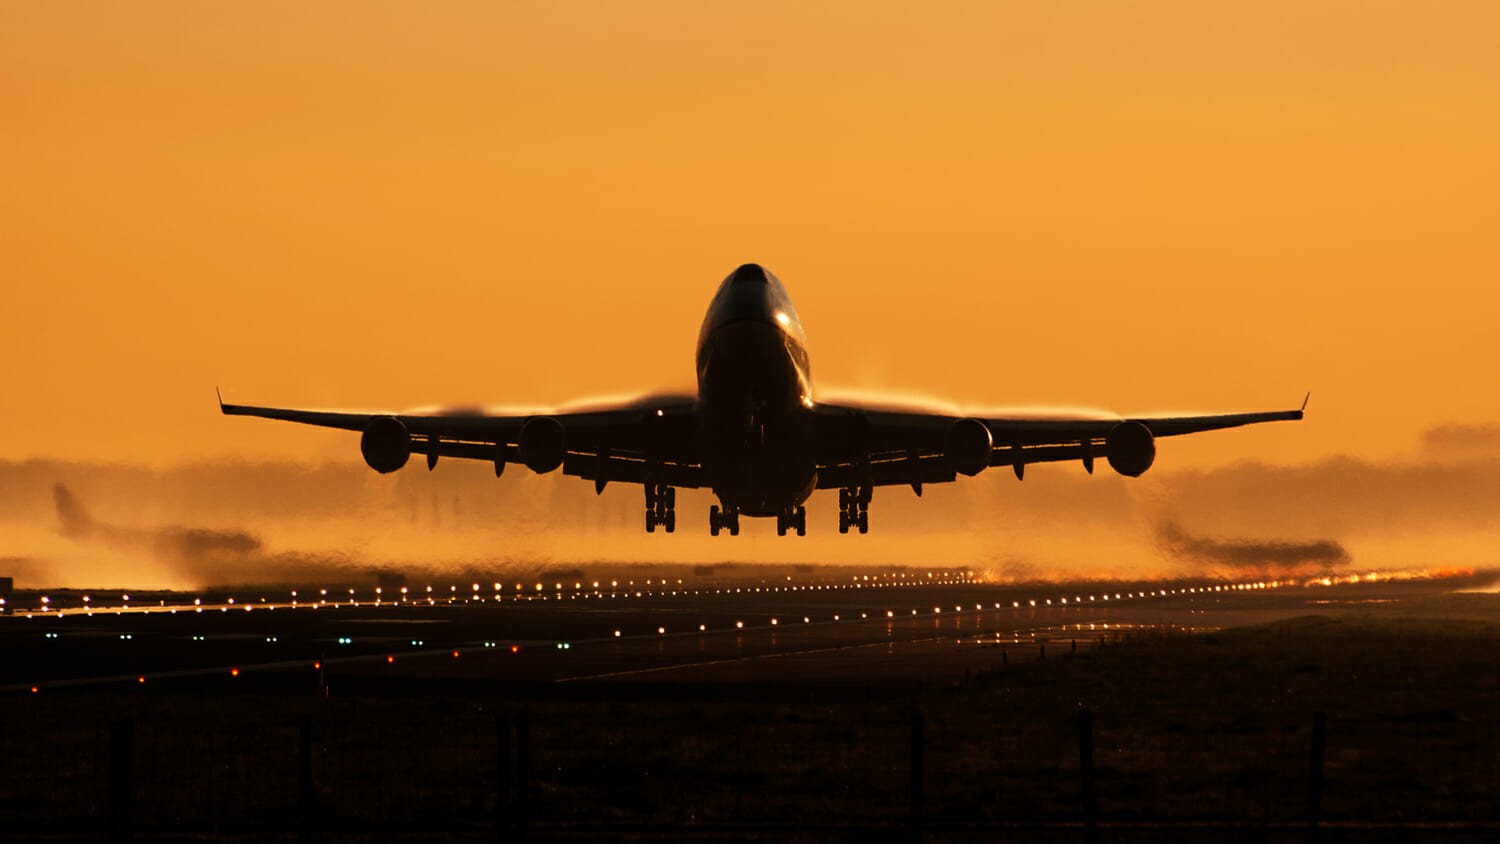 How Much Fuel does the Jumbo Jet Burn? 